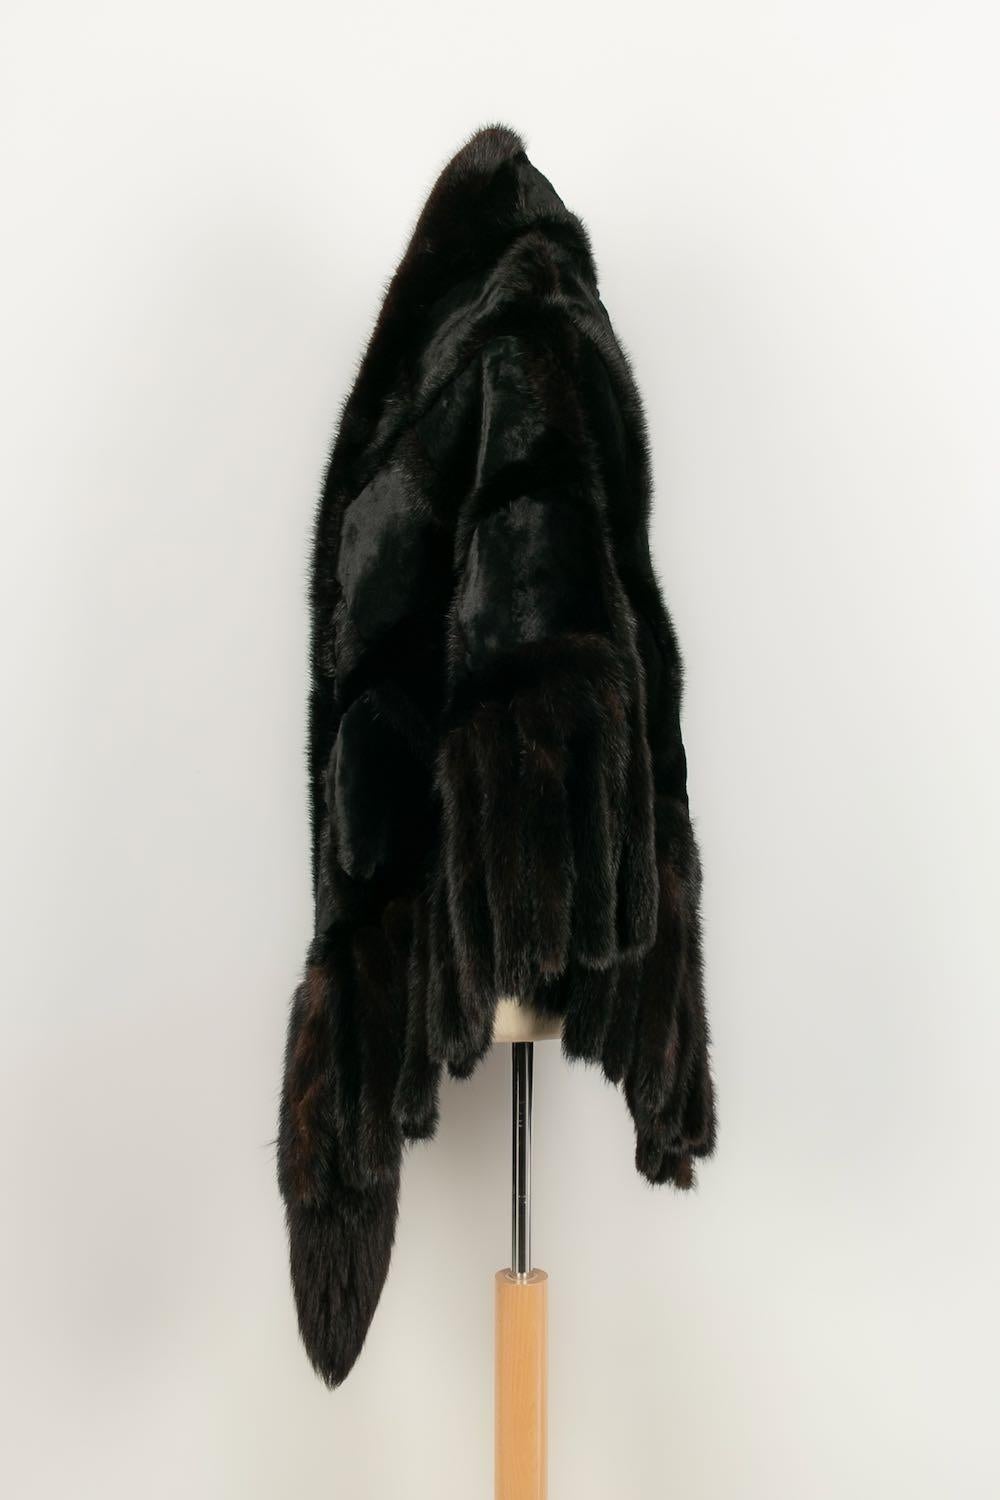 Yves Saint Laurent - (Made in France) Dark mink fur cape with a triangular shape. No size tag, it fits a 36FR/38FR/40FR.

Additional information: 
Dimensions: Width without bangs: 150 cm, Length without bangs: 68 cm
Condition: Very good